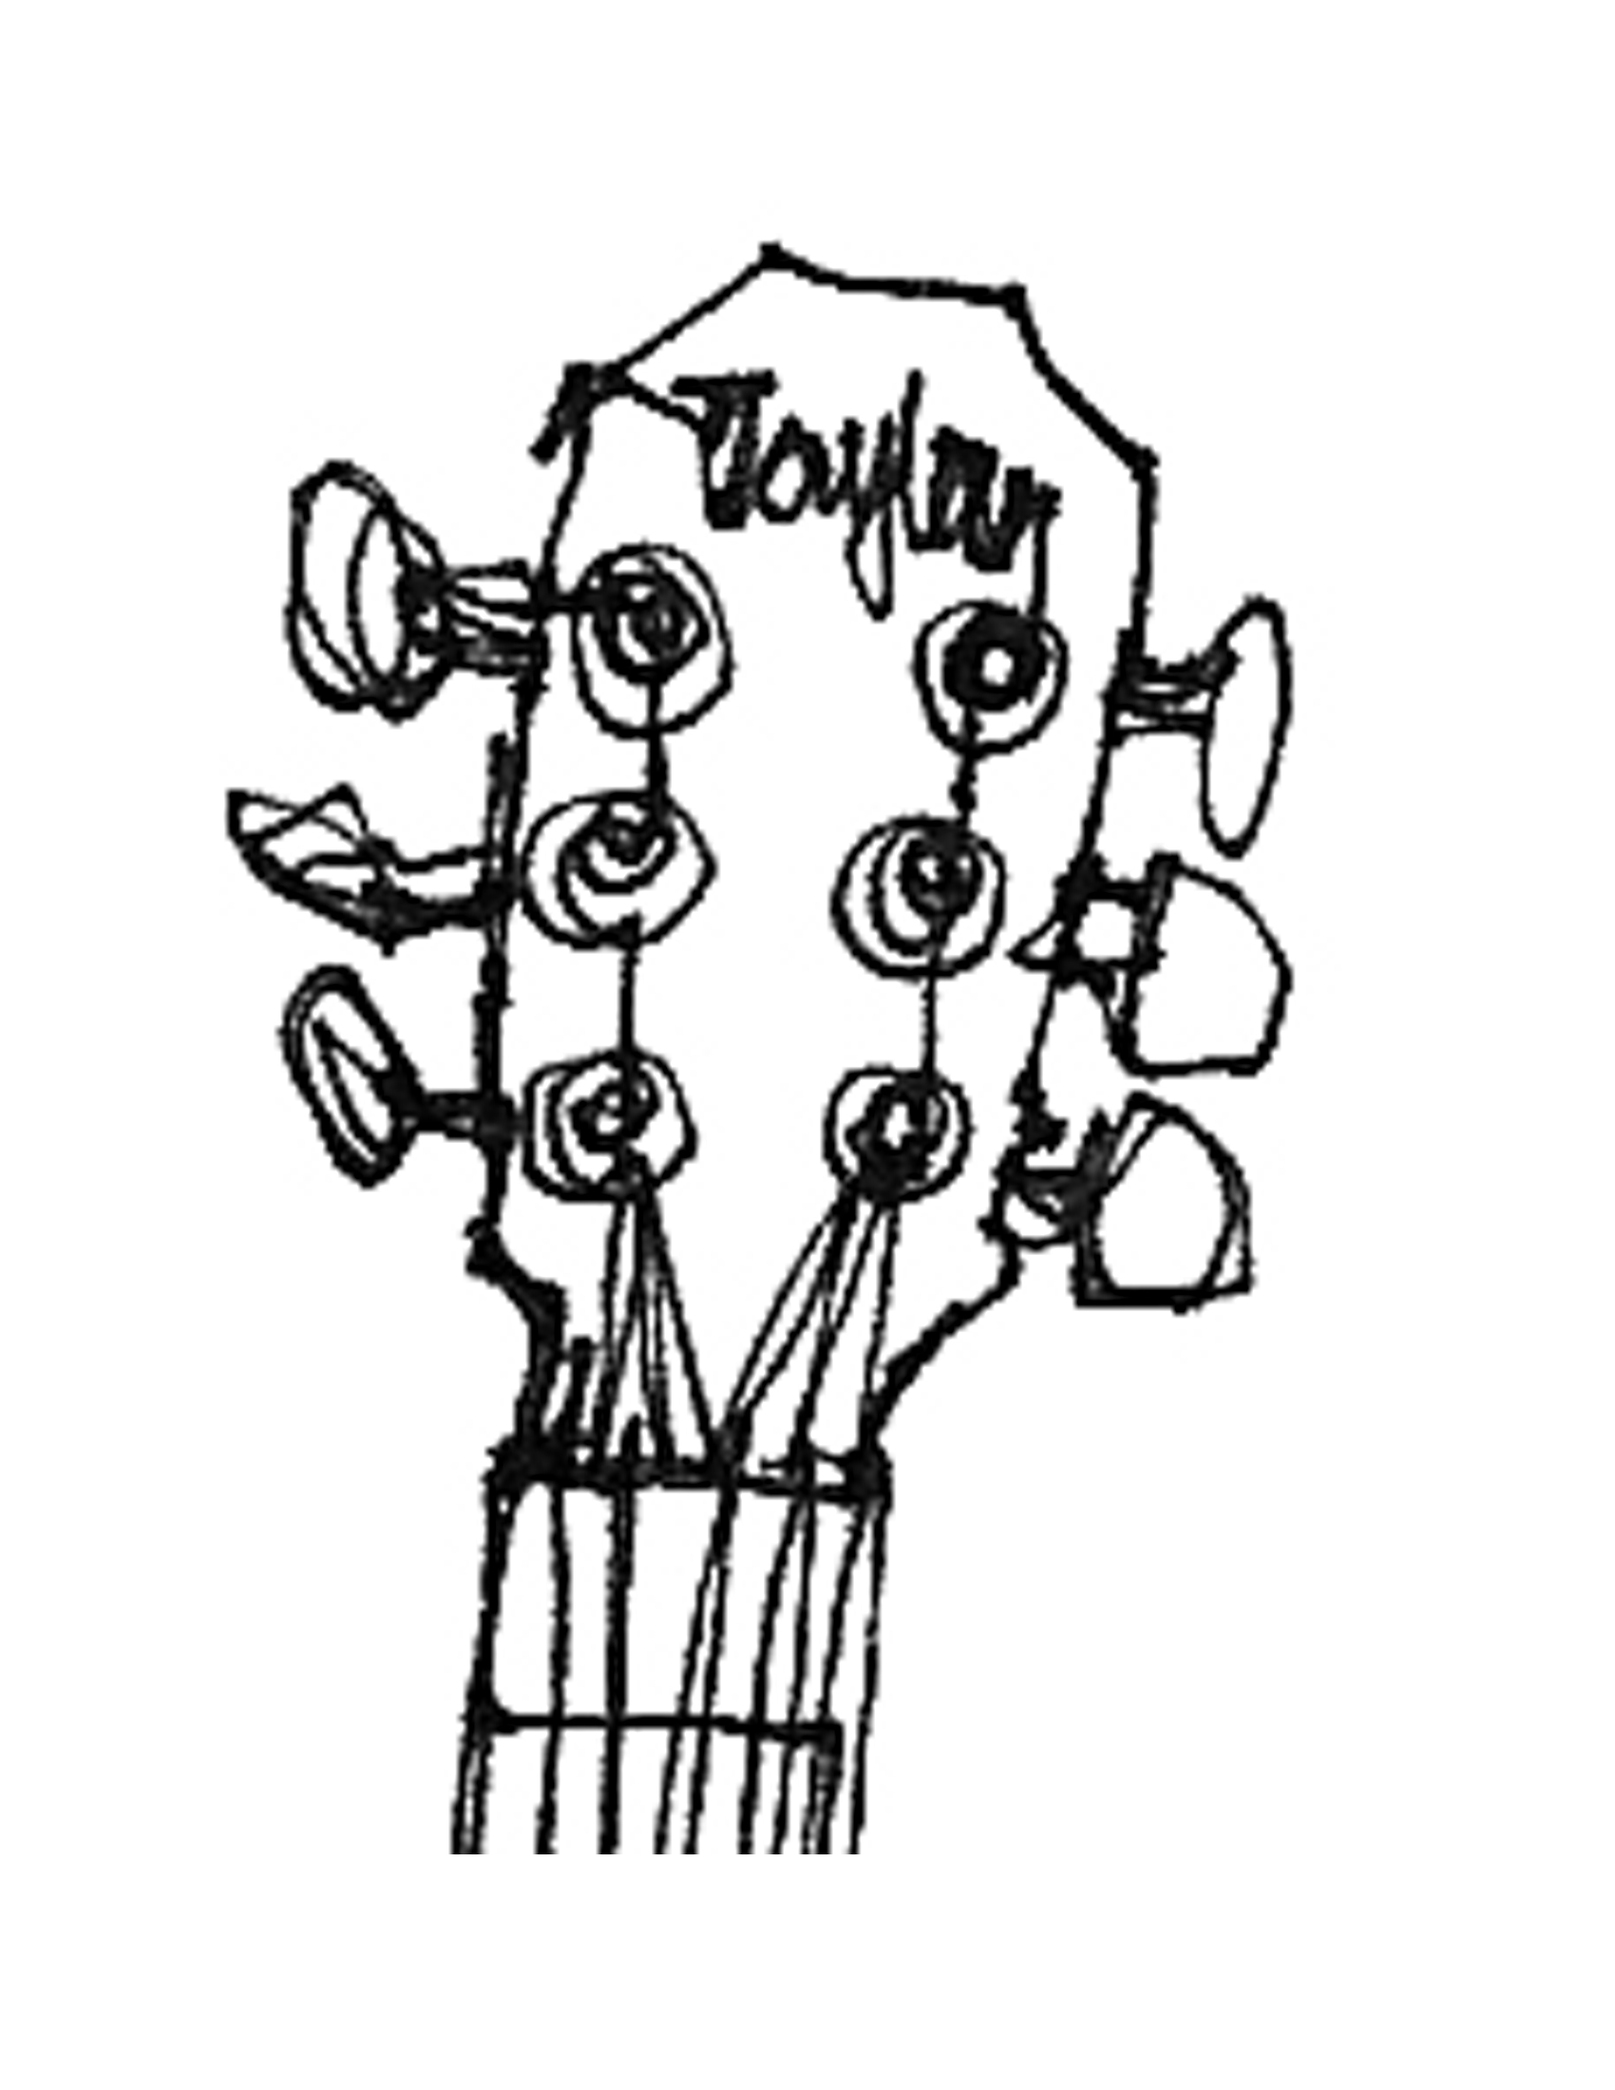 Guitar Line Drawing Clipart - Free to use Clip Art Resource - ClipArt